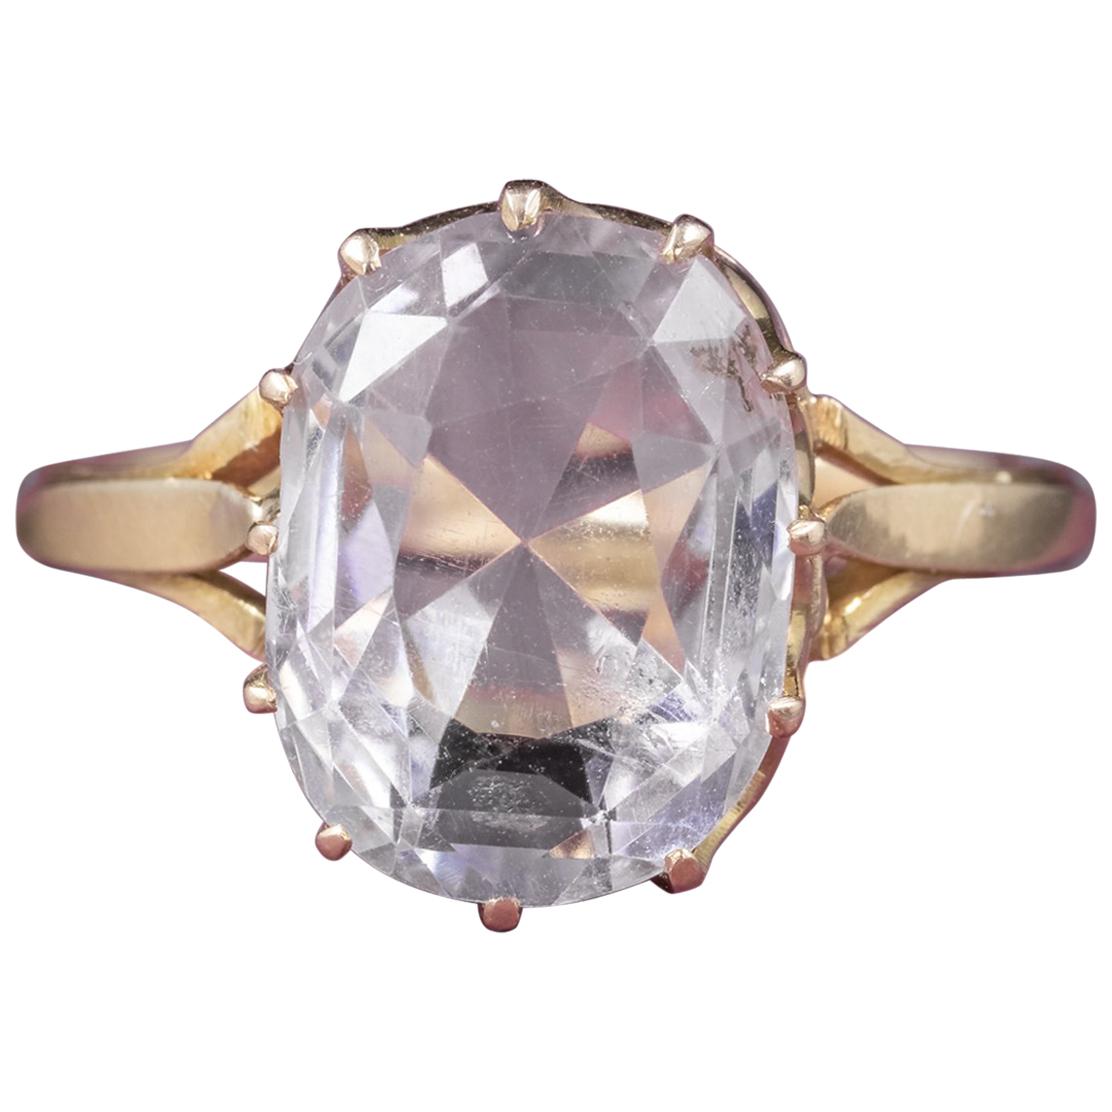 Antique Victorian Purple Spinel 18 Carat Gold 5 Carat Spinel, circa 1900 Ring For Sale